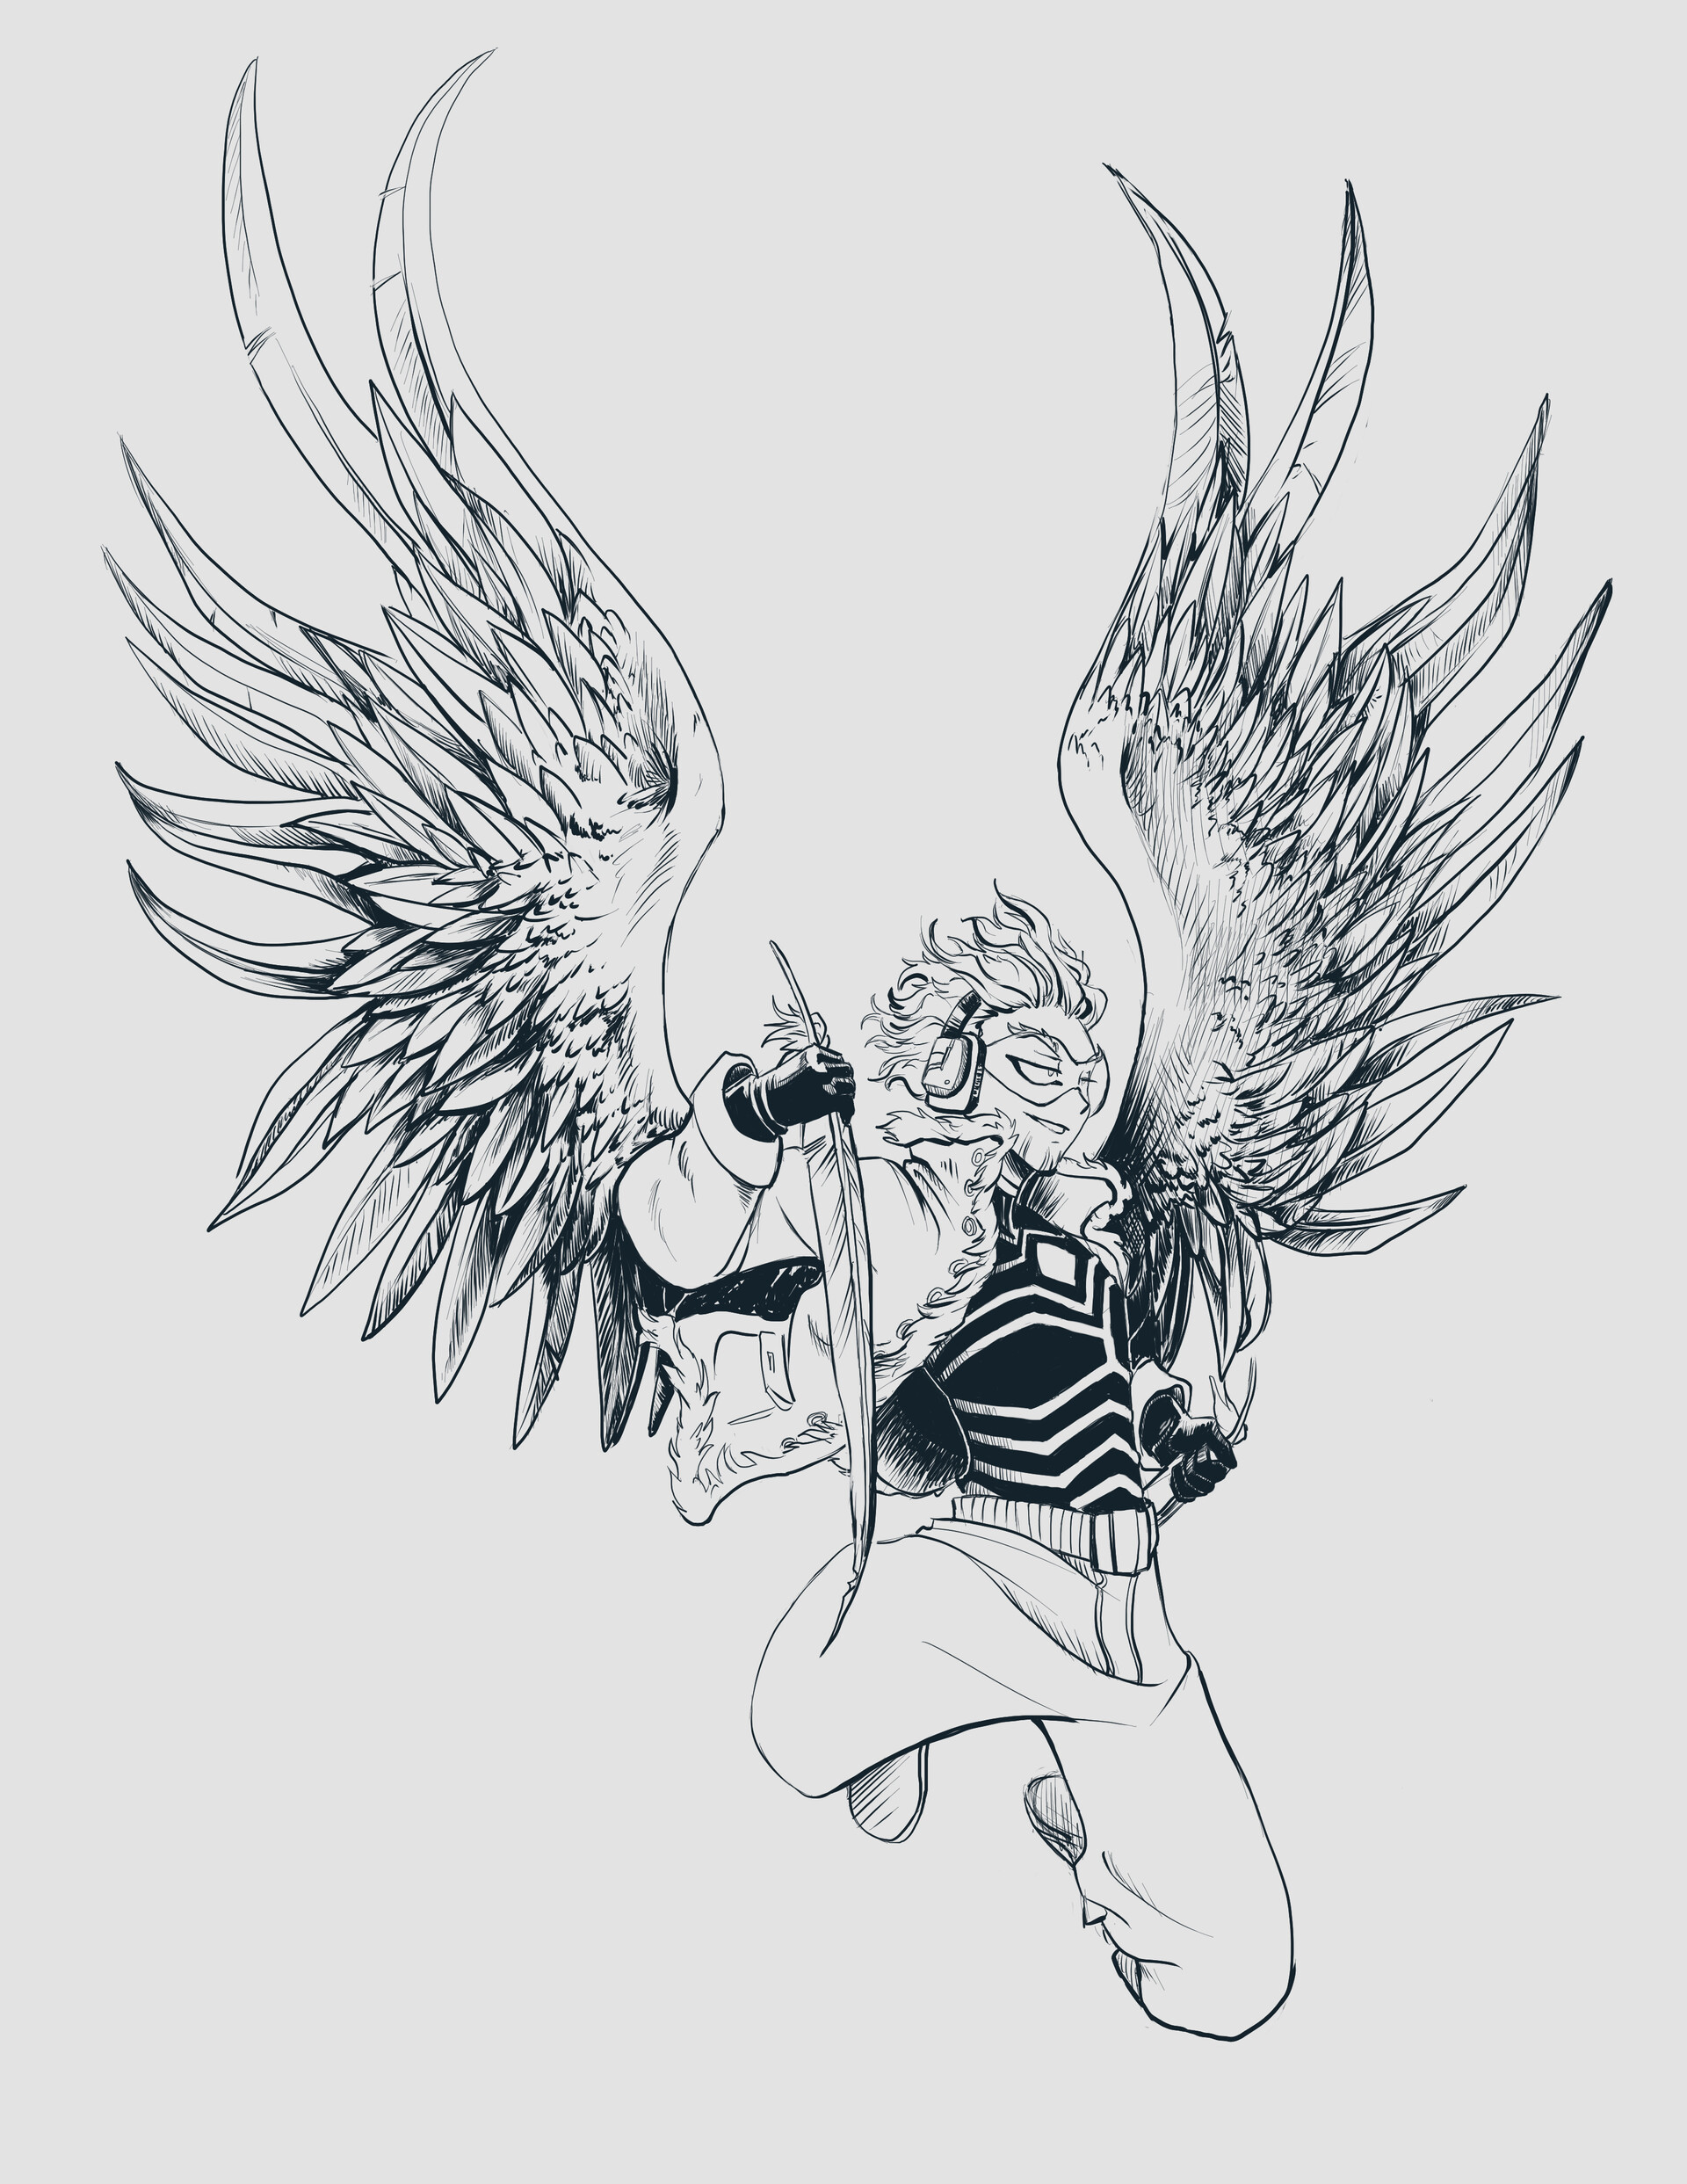 Hawks from BNHA, more fan art to work on movement and because I have a soft...